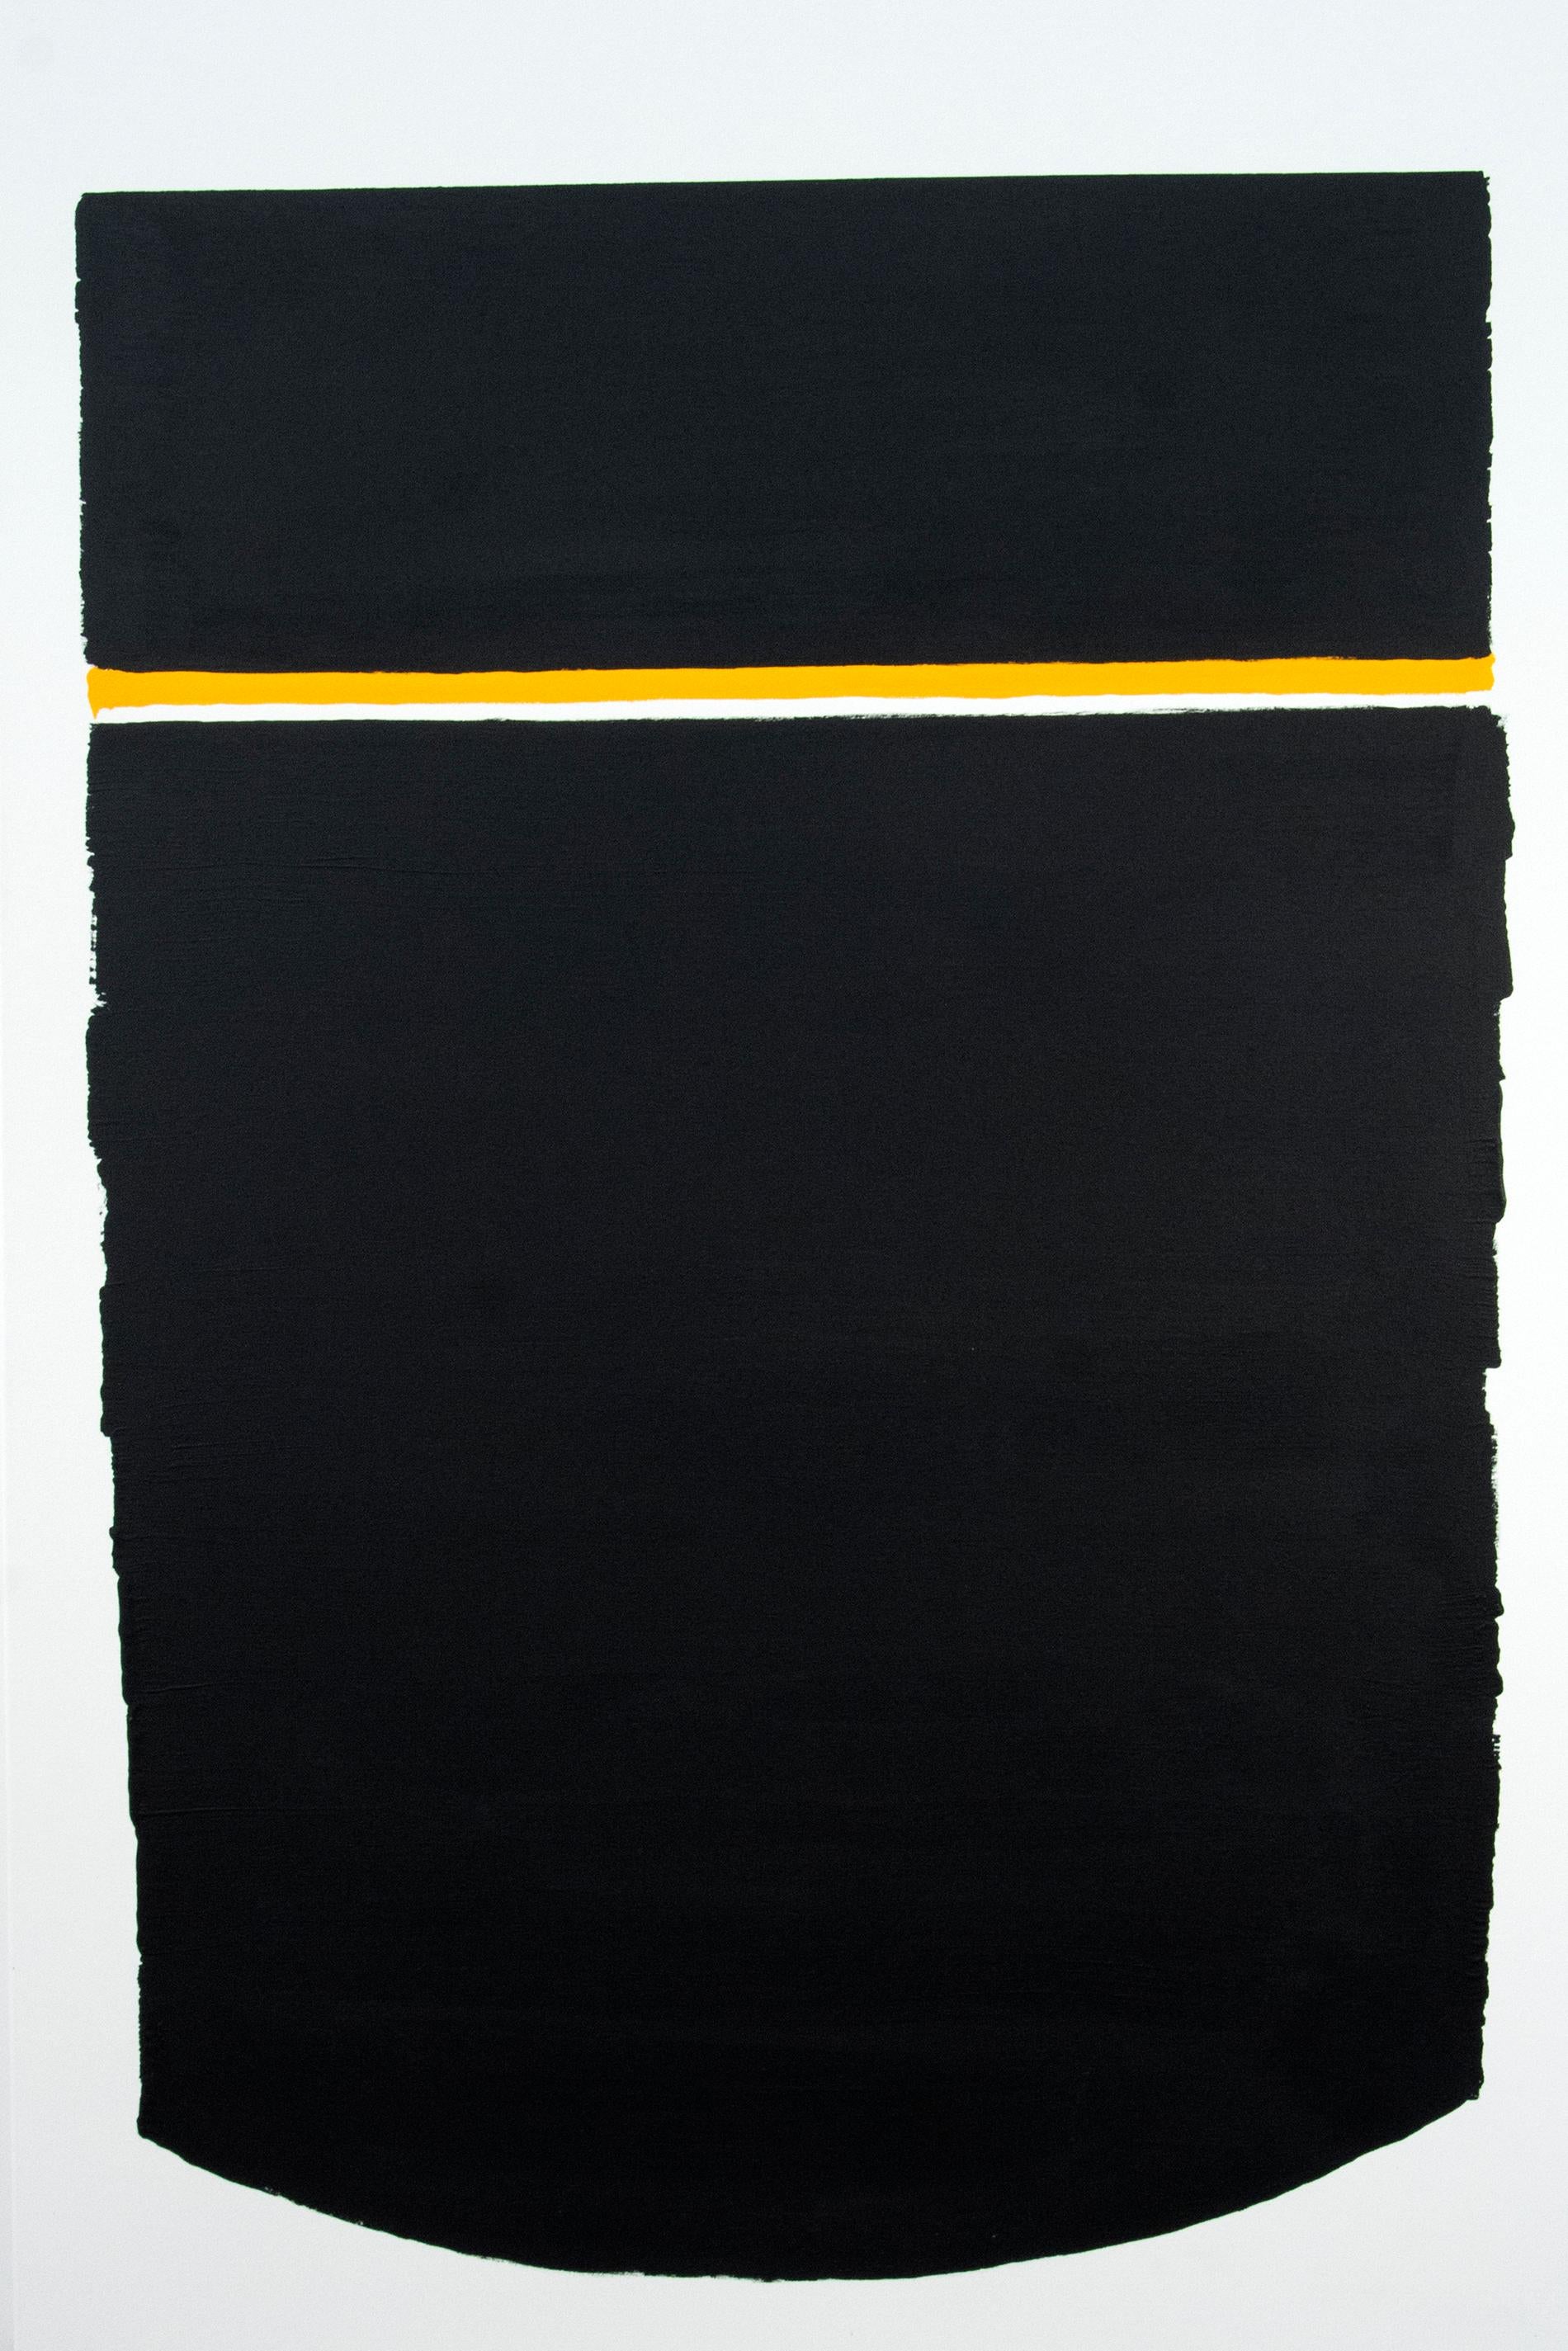 Tim Forbes Abstract Painting - Plan B - bold, black and white, abstract minimalist, acrylic on canvas